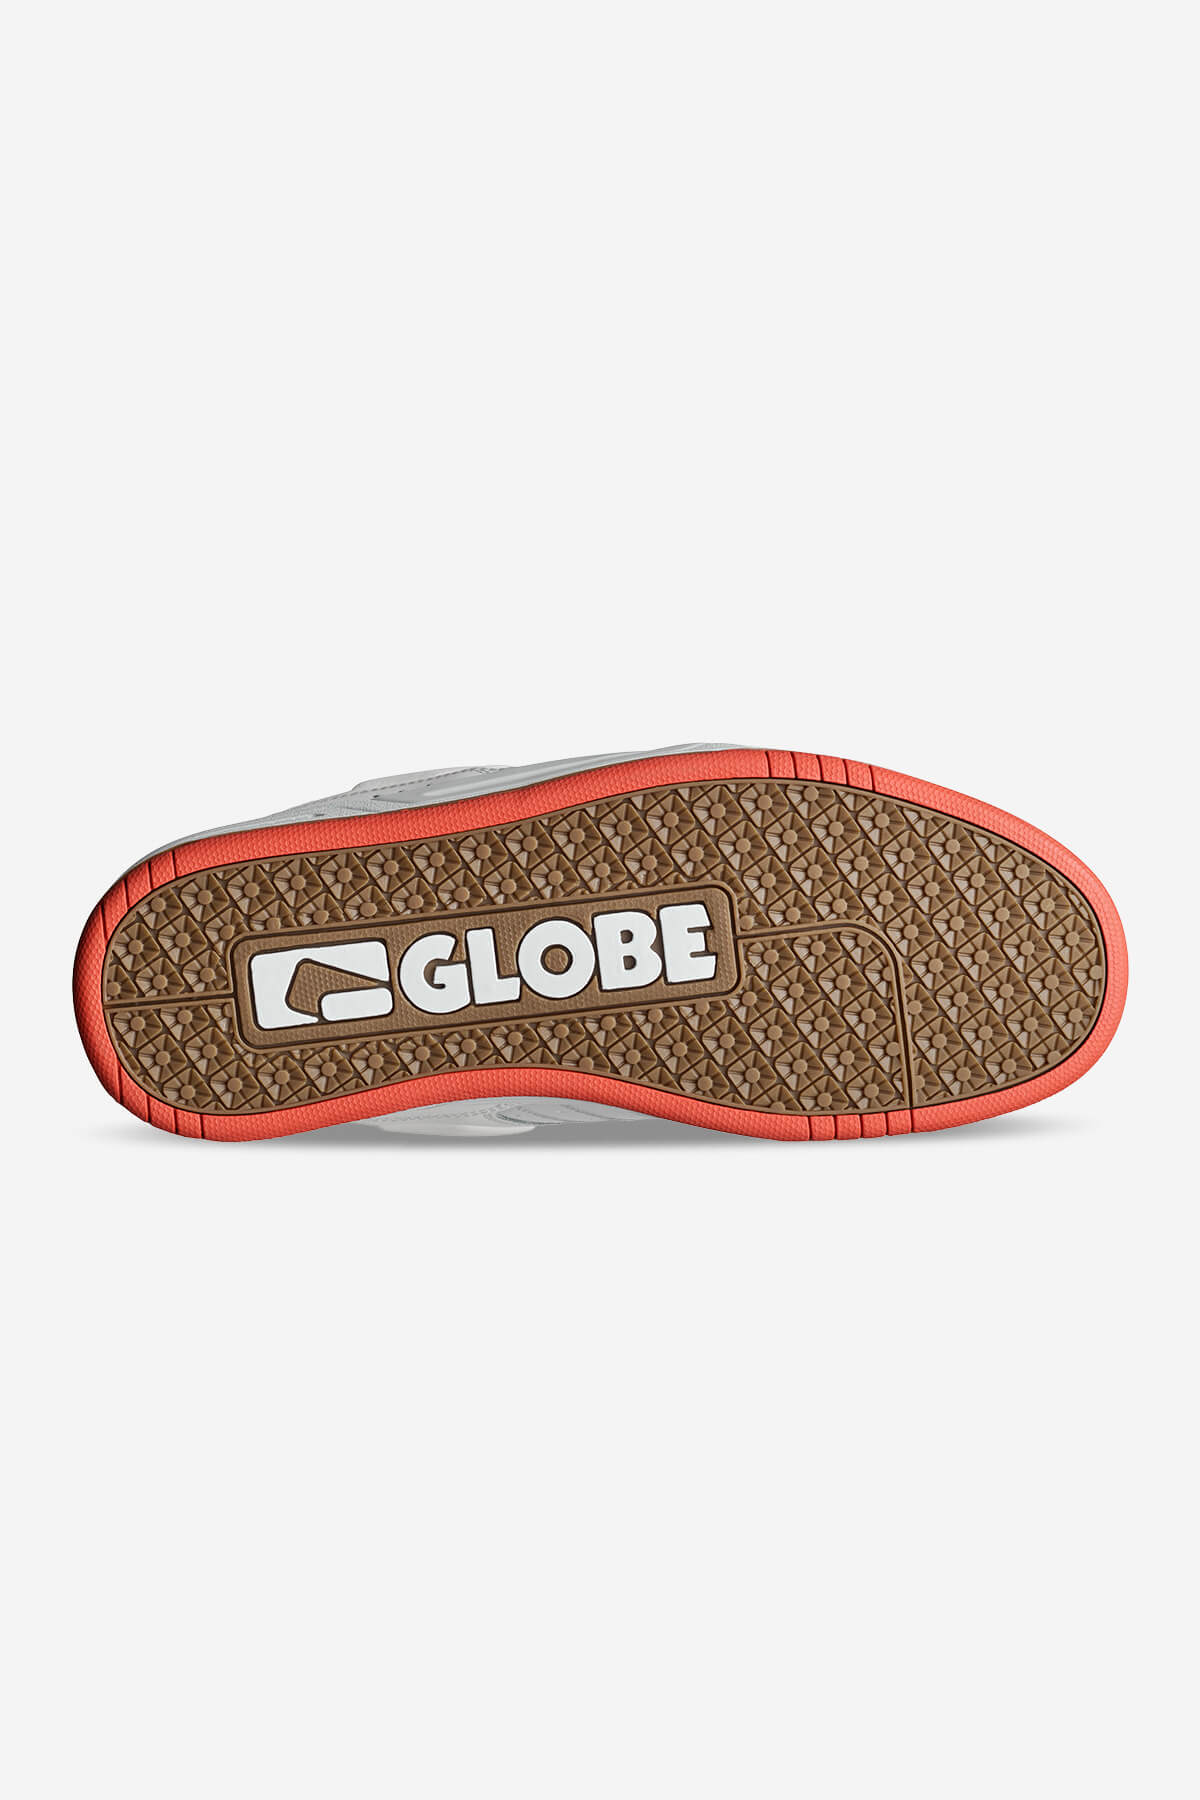 Globe - Fusion - White/Red - skateboard Chaussures